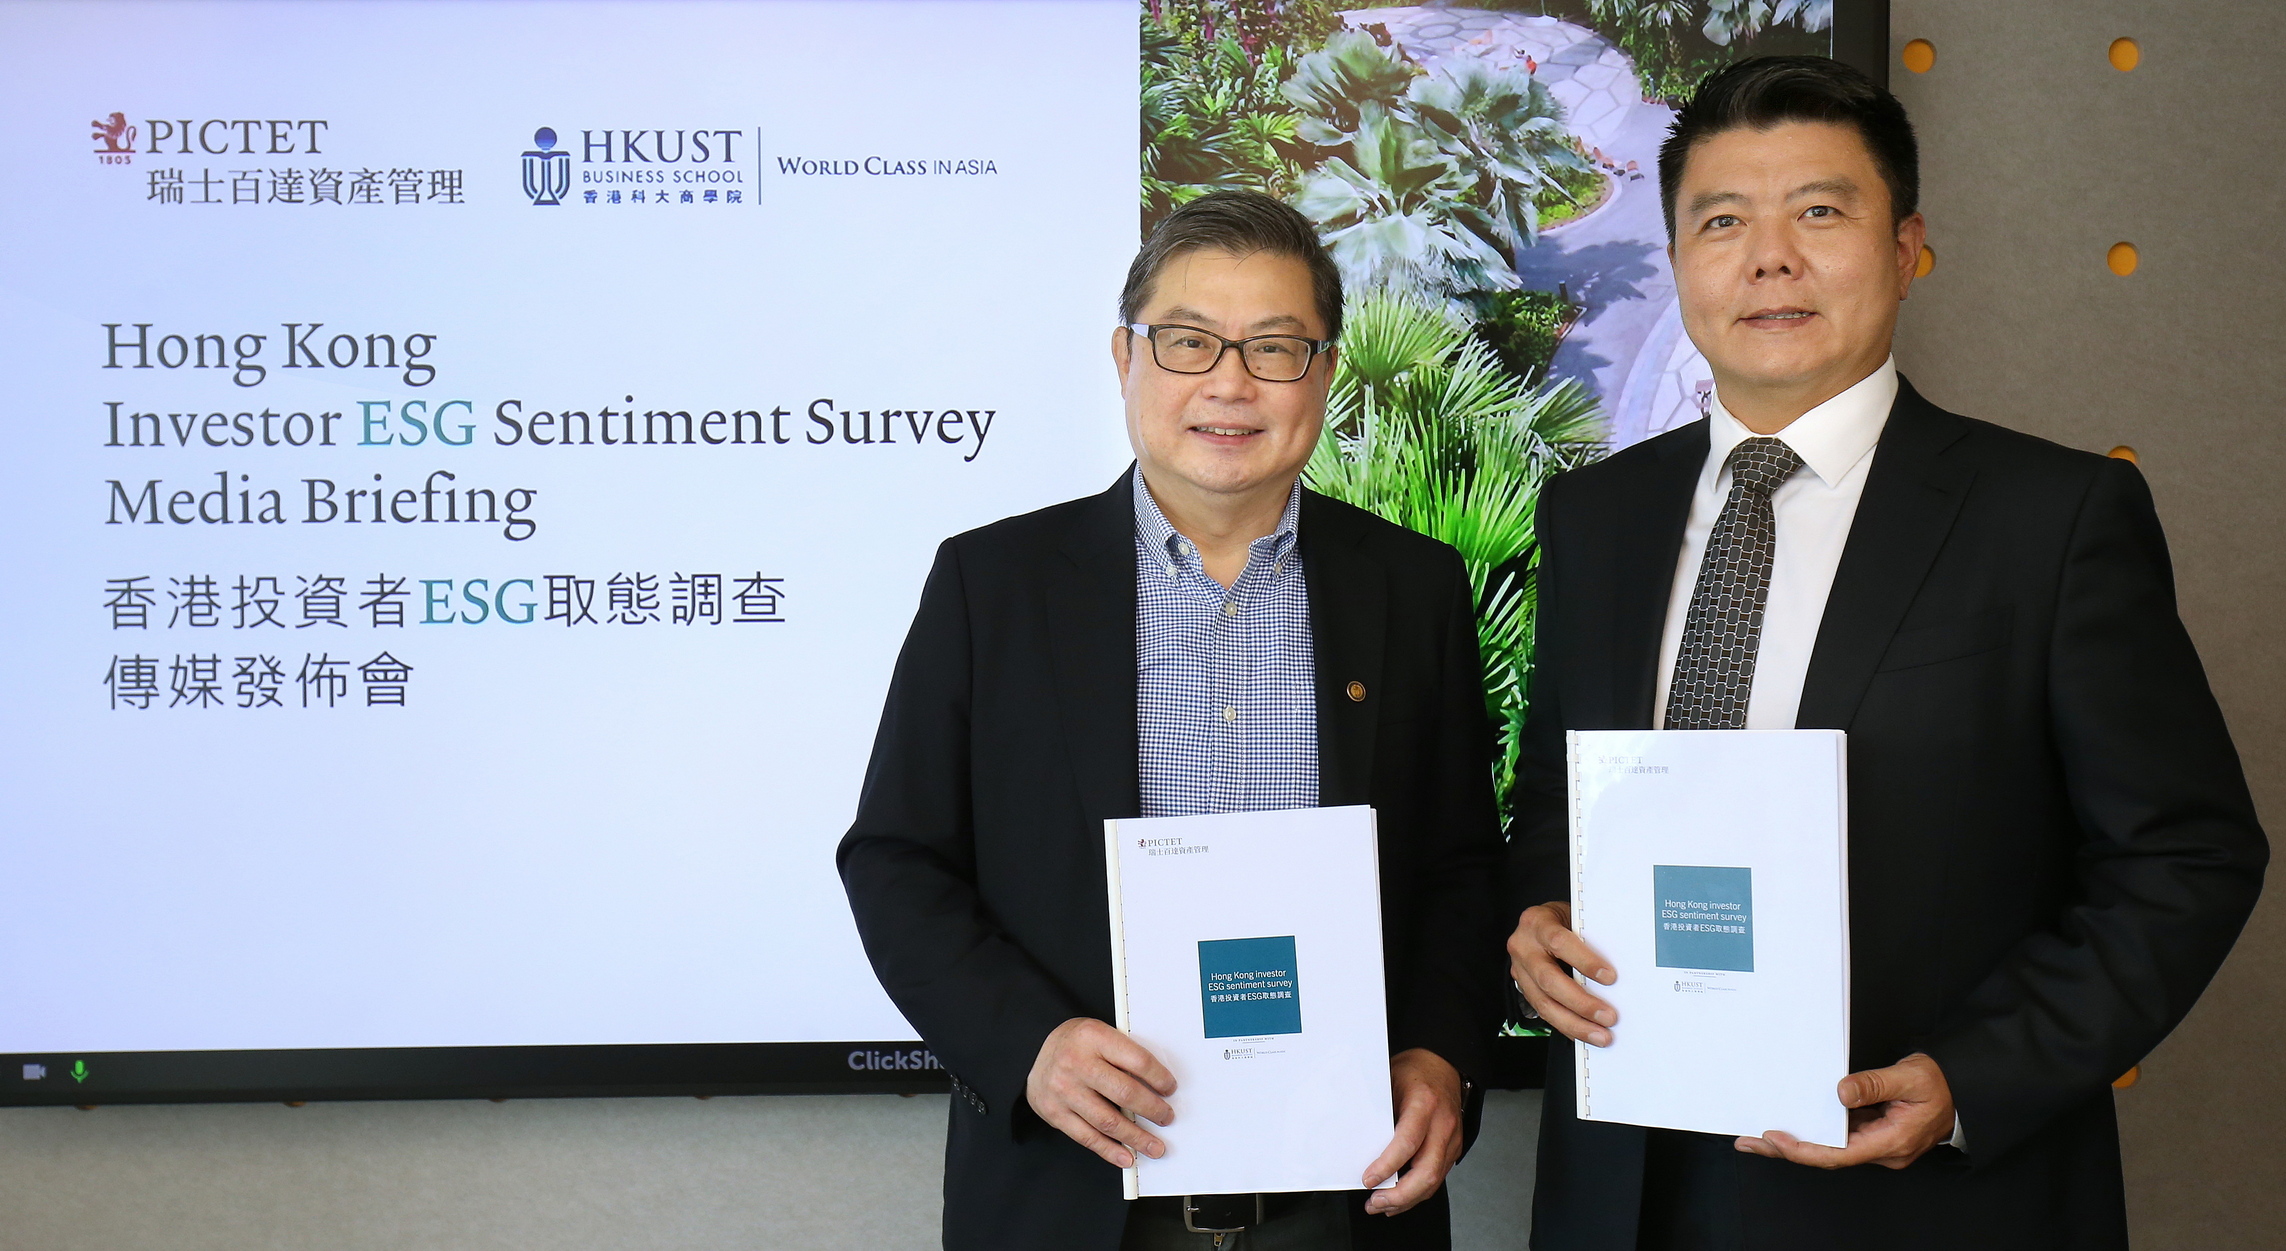 HKUST Business School joined hands with Pictet Asset Management in a large-scale survey on Hong Kong investors' sentiment towards ESG investing. At a virtual media briefing, Professor Tam Kar Yan, Dean of HKUST Business School and Freeman Tsang, Head of Intermediaries, Asia ex Japan at Pictet Asset Management, present the key findings and insights from the survey. 